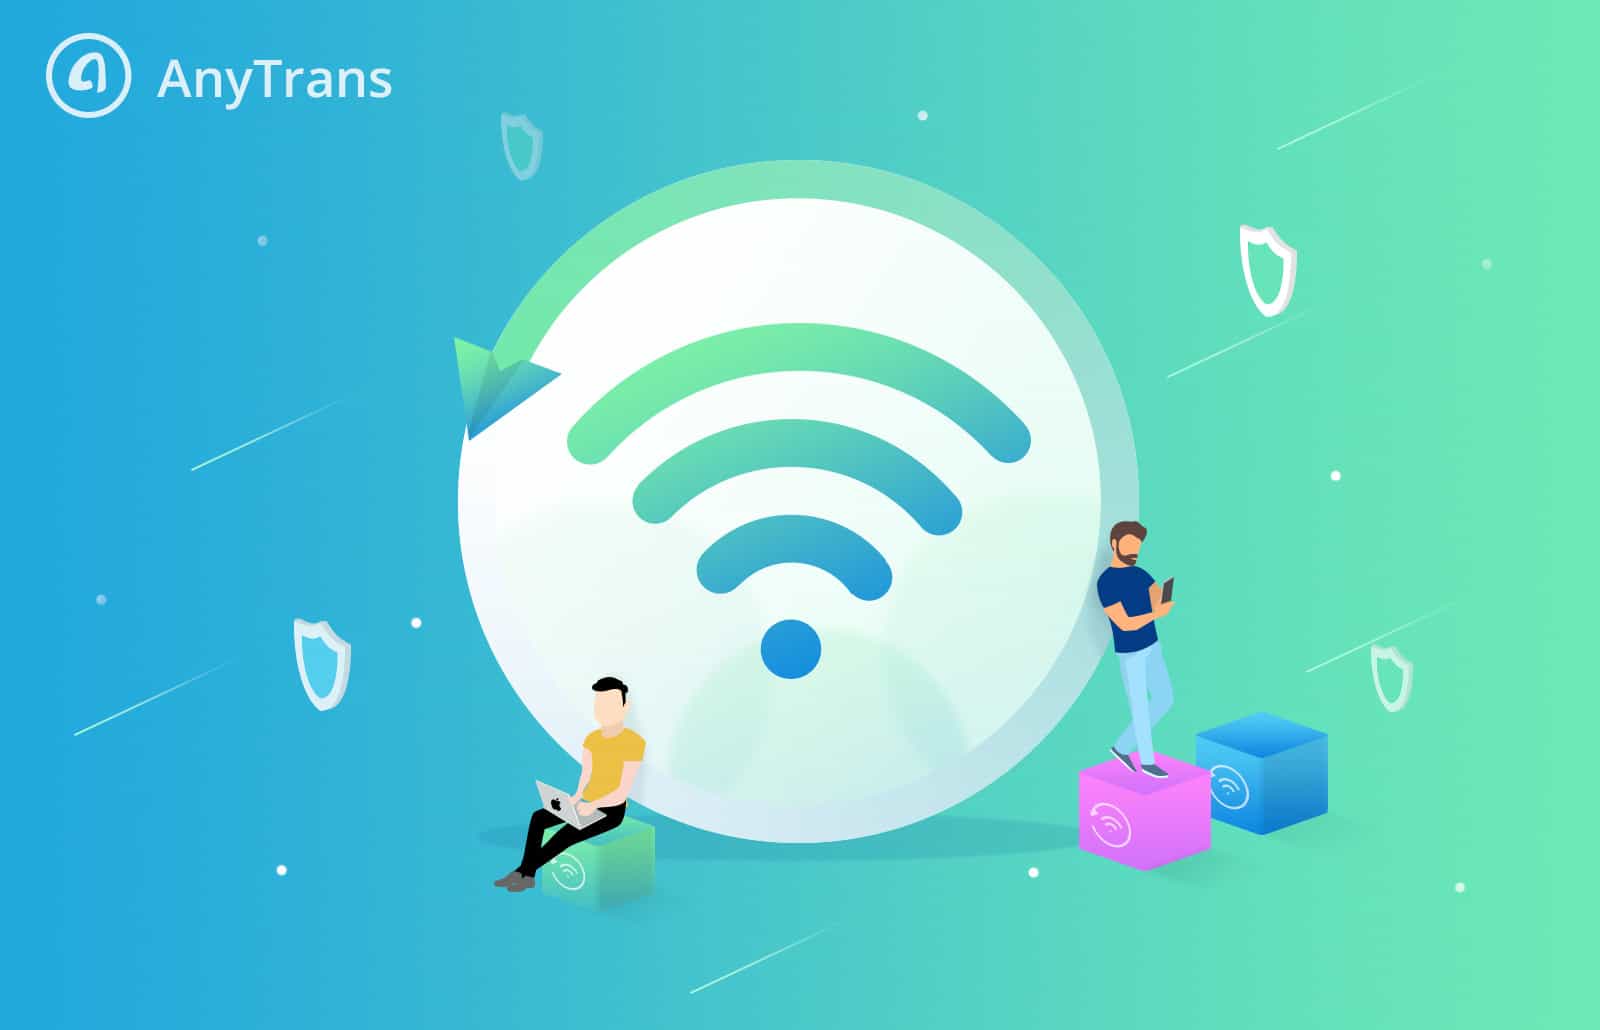 With AnyTrans' new Air Backup feature, you can wirelessly and automatically back up all your iOS devices.